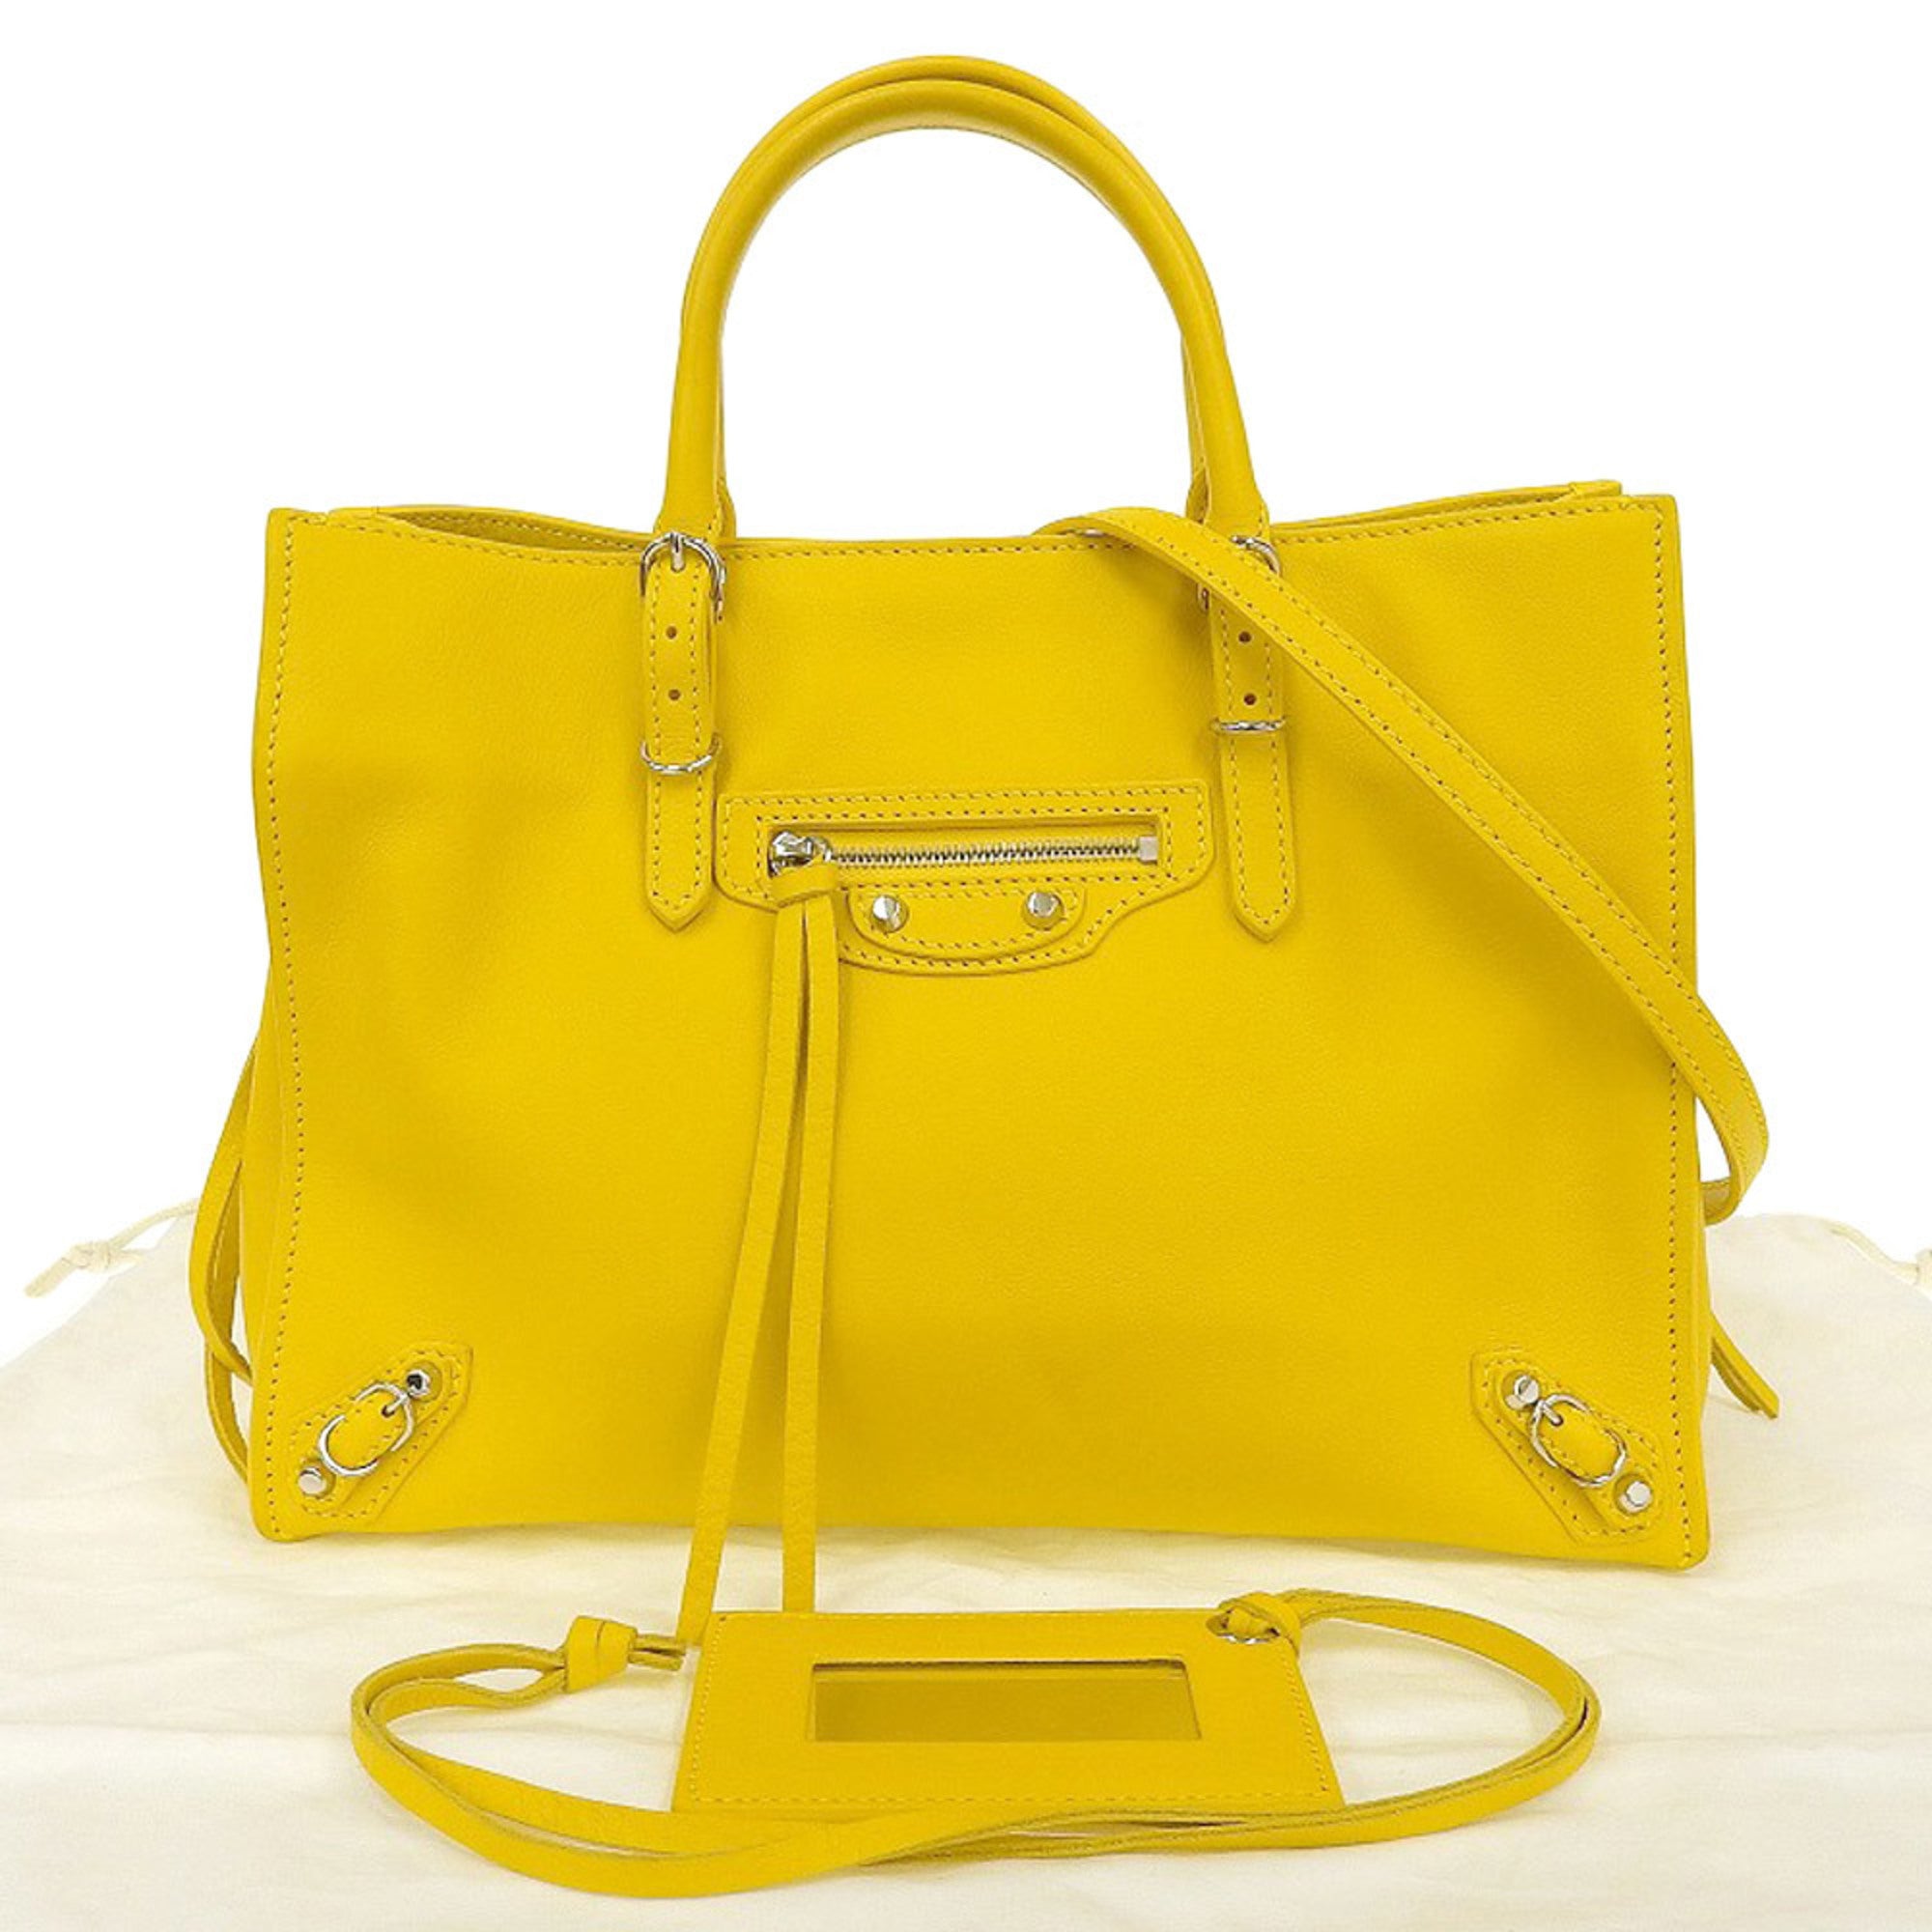 Balenciaga Yellow Leather The Work City Bag  Mine  Yours